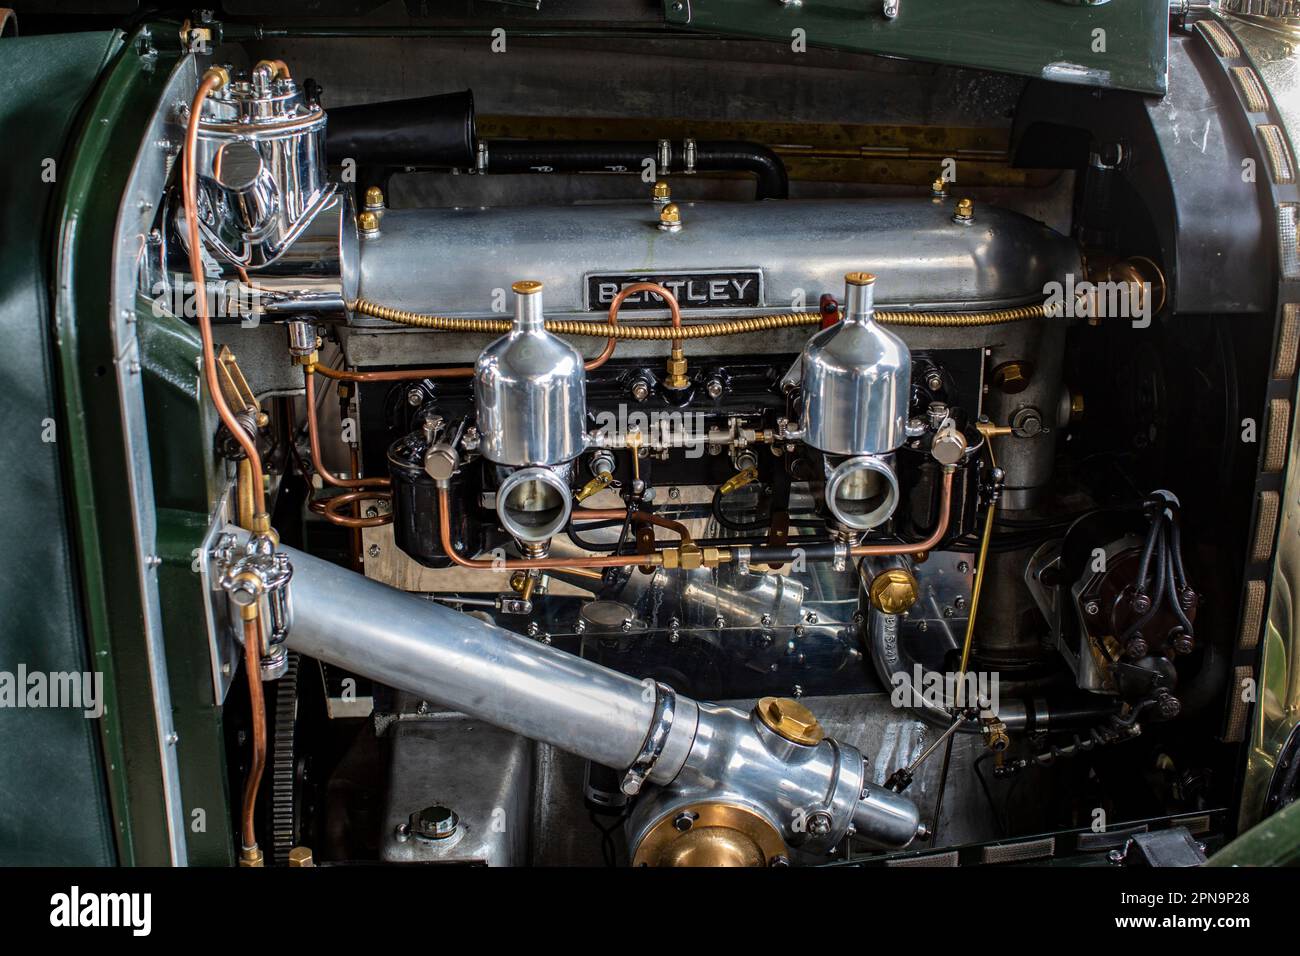 Bentley 4½-litre pre war car engine at Members' Meeting at Goodwood Motor Circuit in West Sussex,United Kingdom. Stock Photo